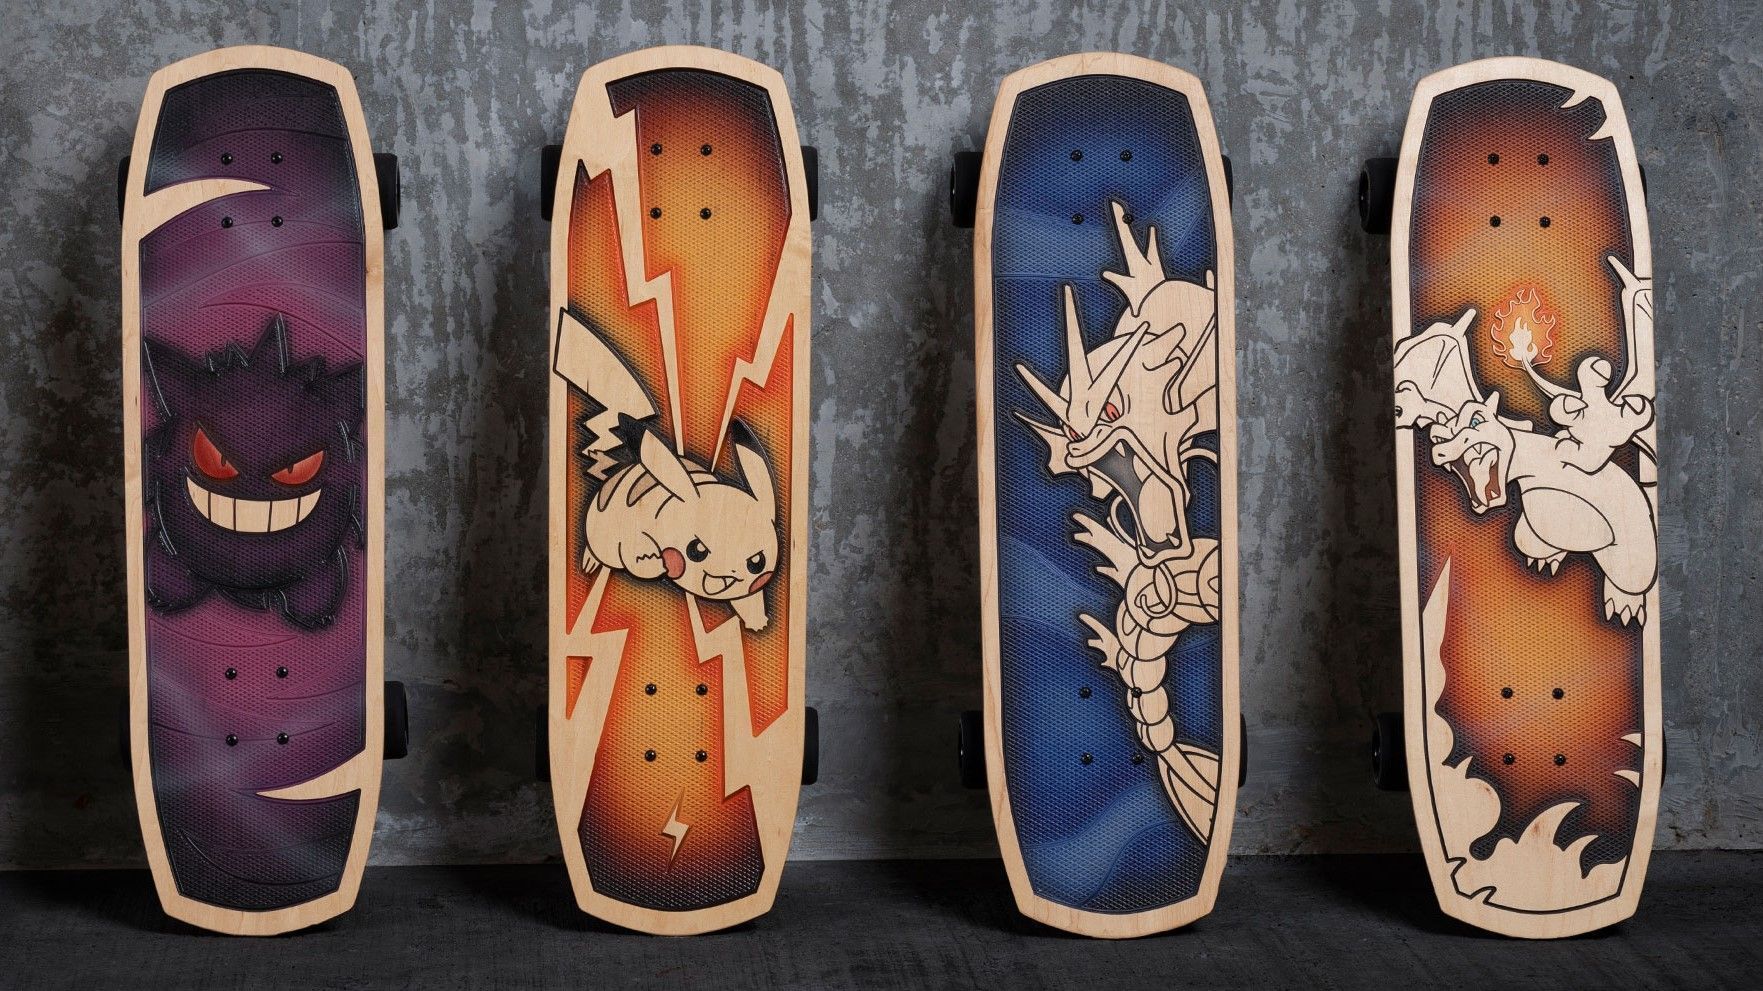 These limitededition Pokémon skateboards are handcrafted masterpieces